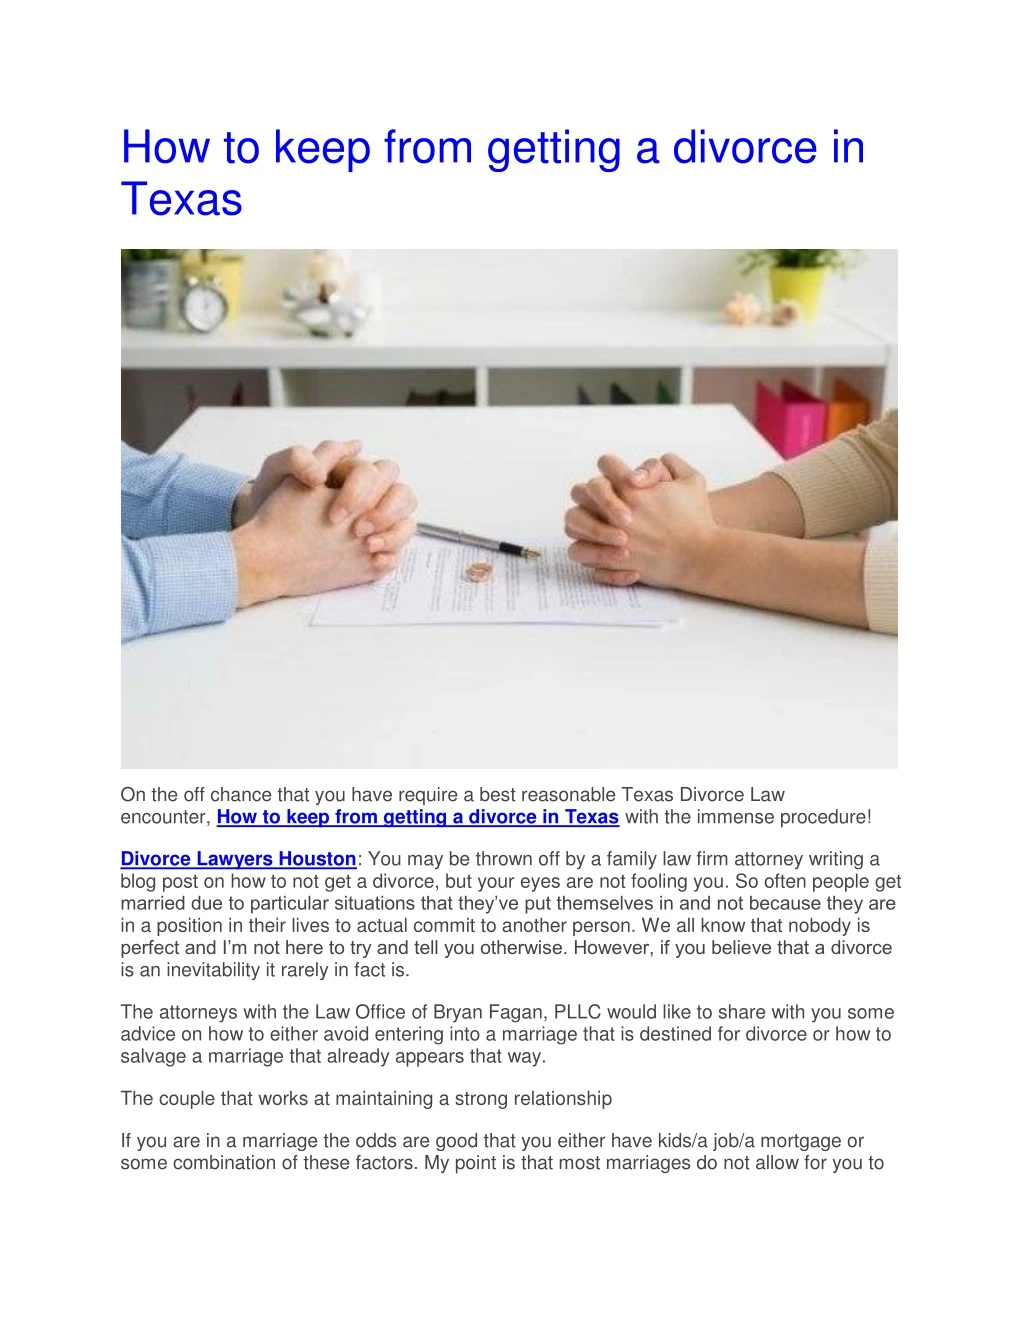 how to keep from getting a divorce in texas